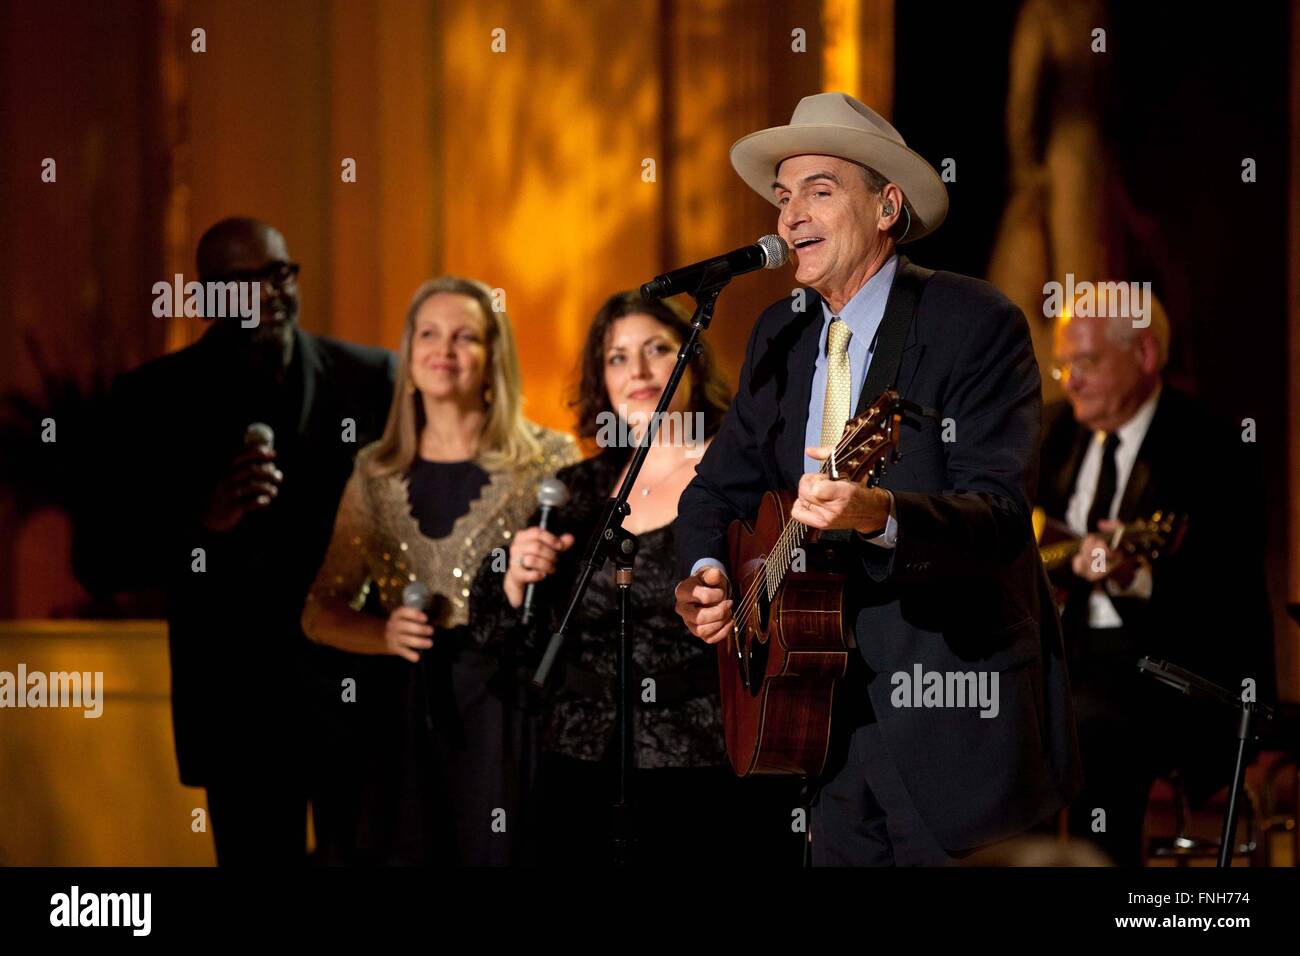 James Taylor performs during the Country Music: In Performance at the White House concert in the East Room of the White House November 21, 2011 in Washington, DC. Stock Photo